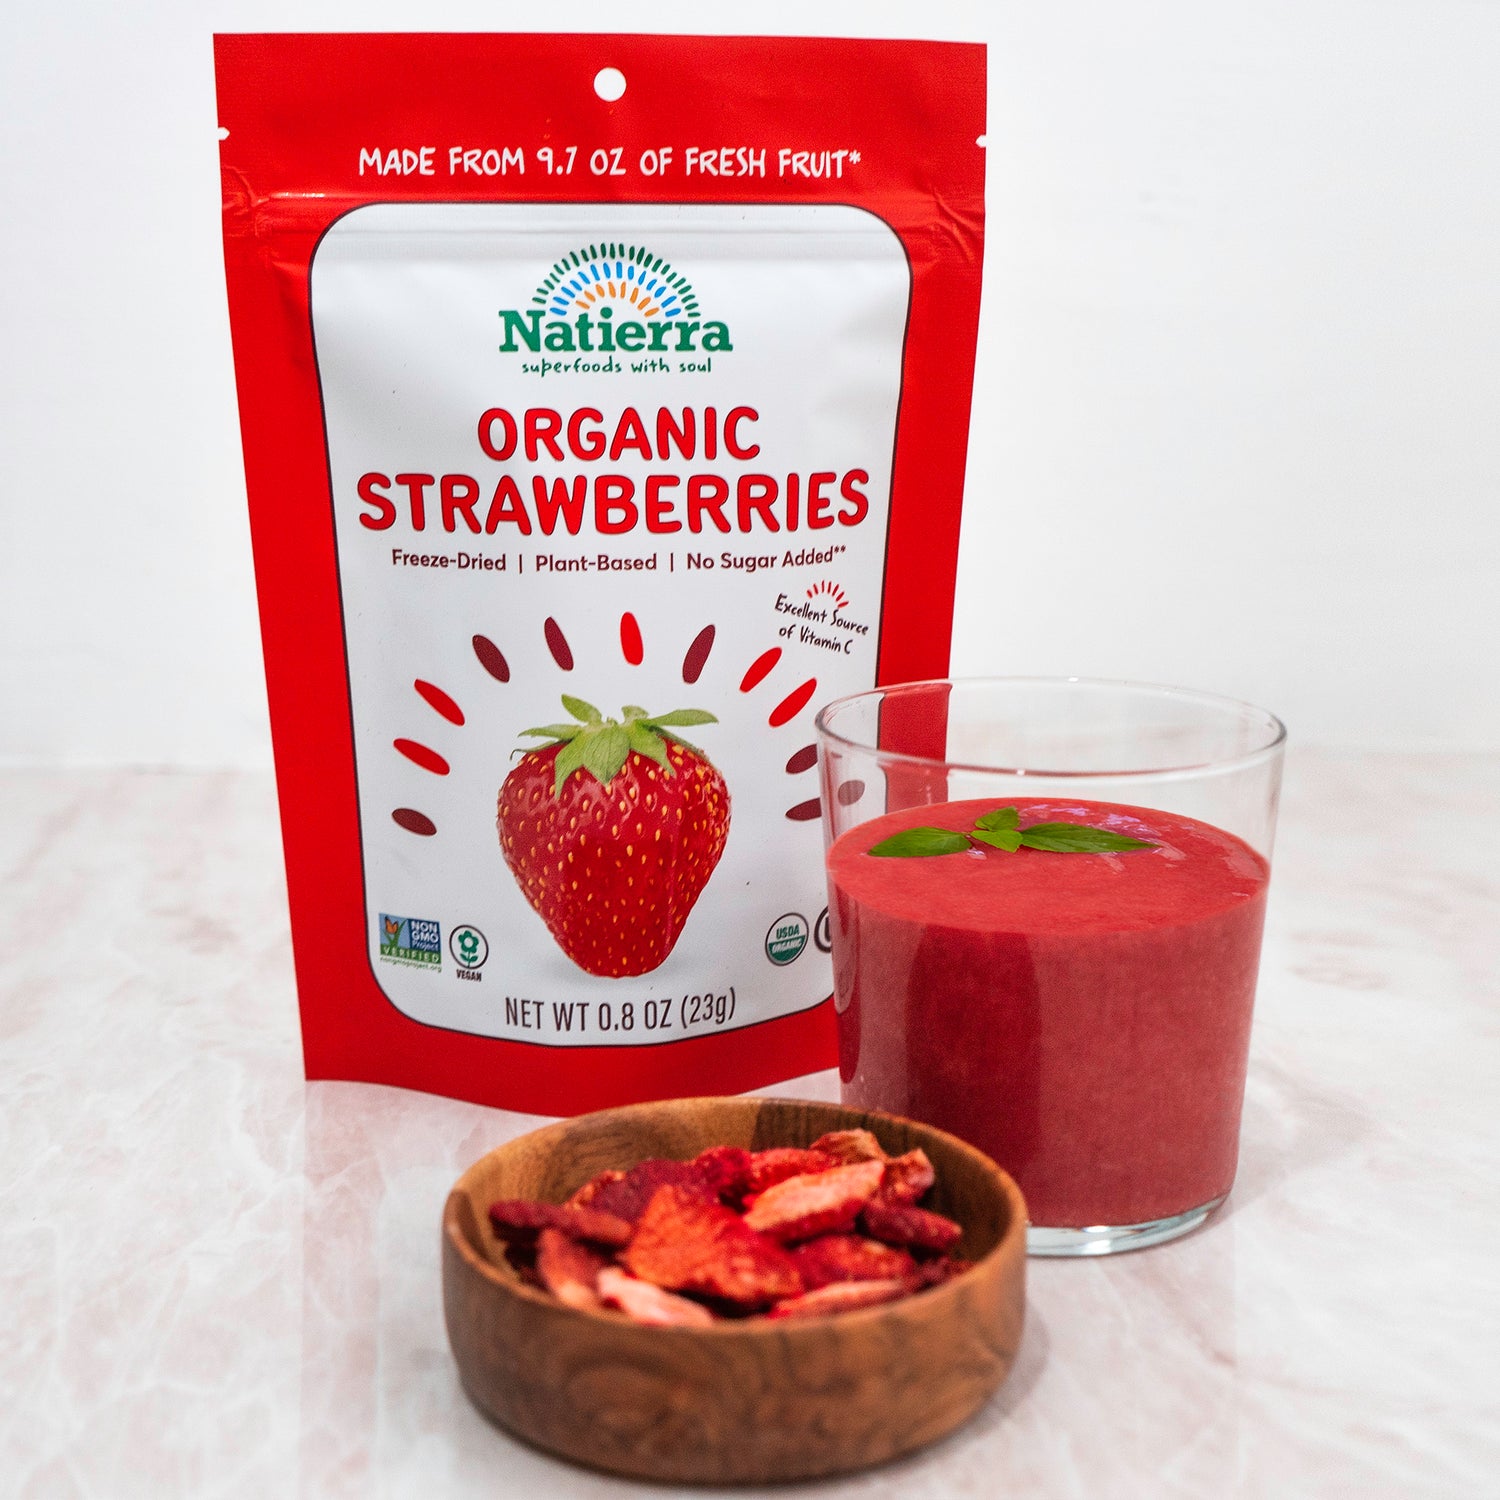 Strawberry snacks and smoothies